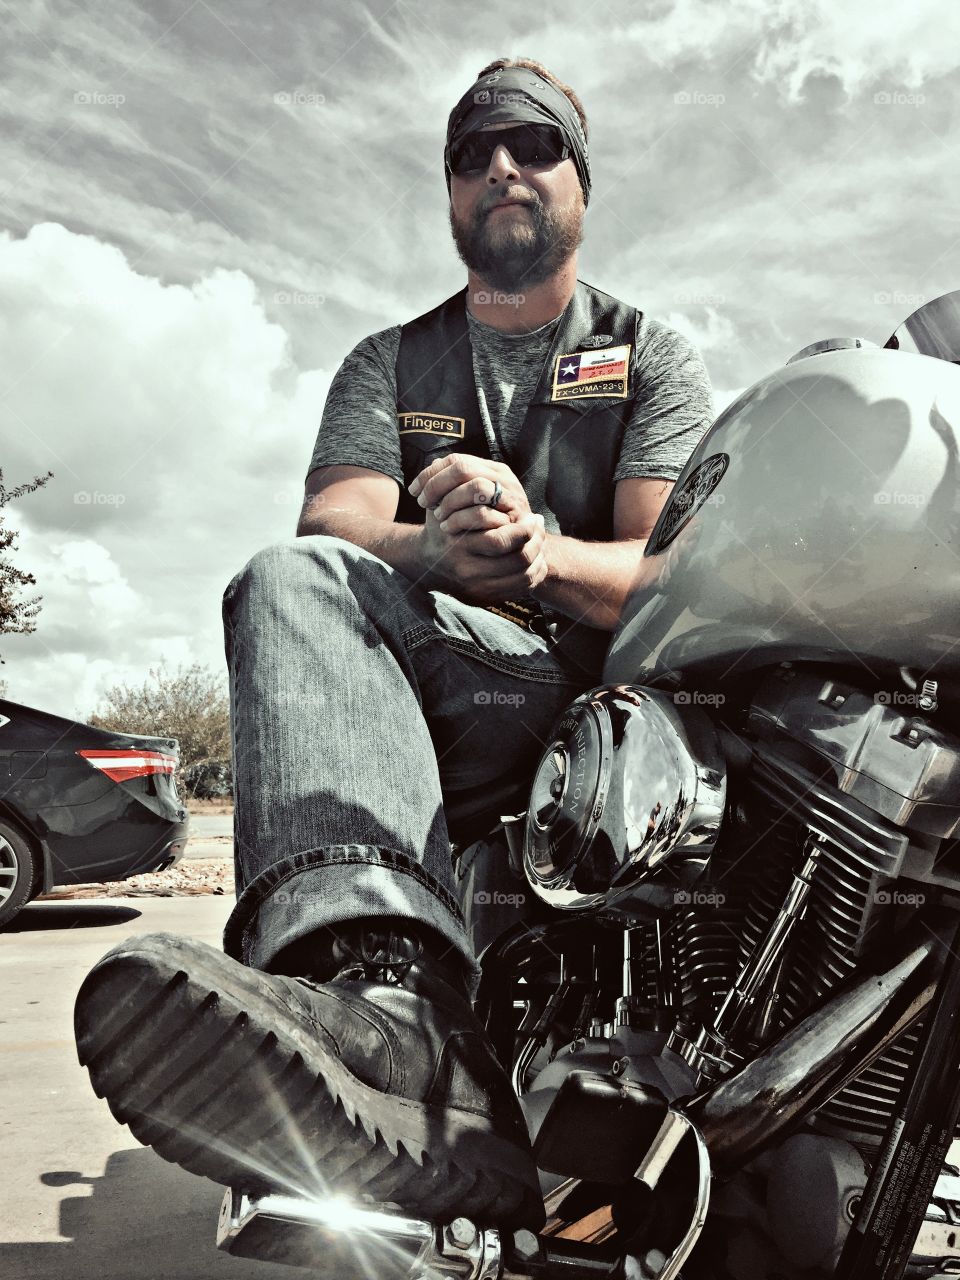 Combat Vet and his Harley . This is a 23-9 CVMA member taking a break 